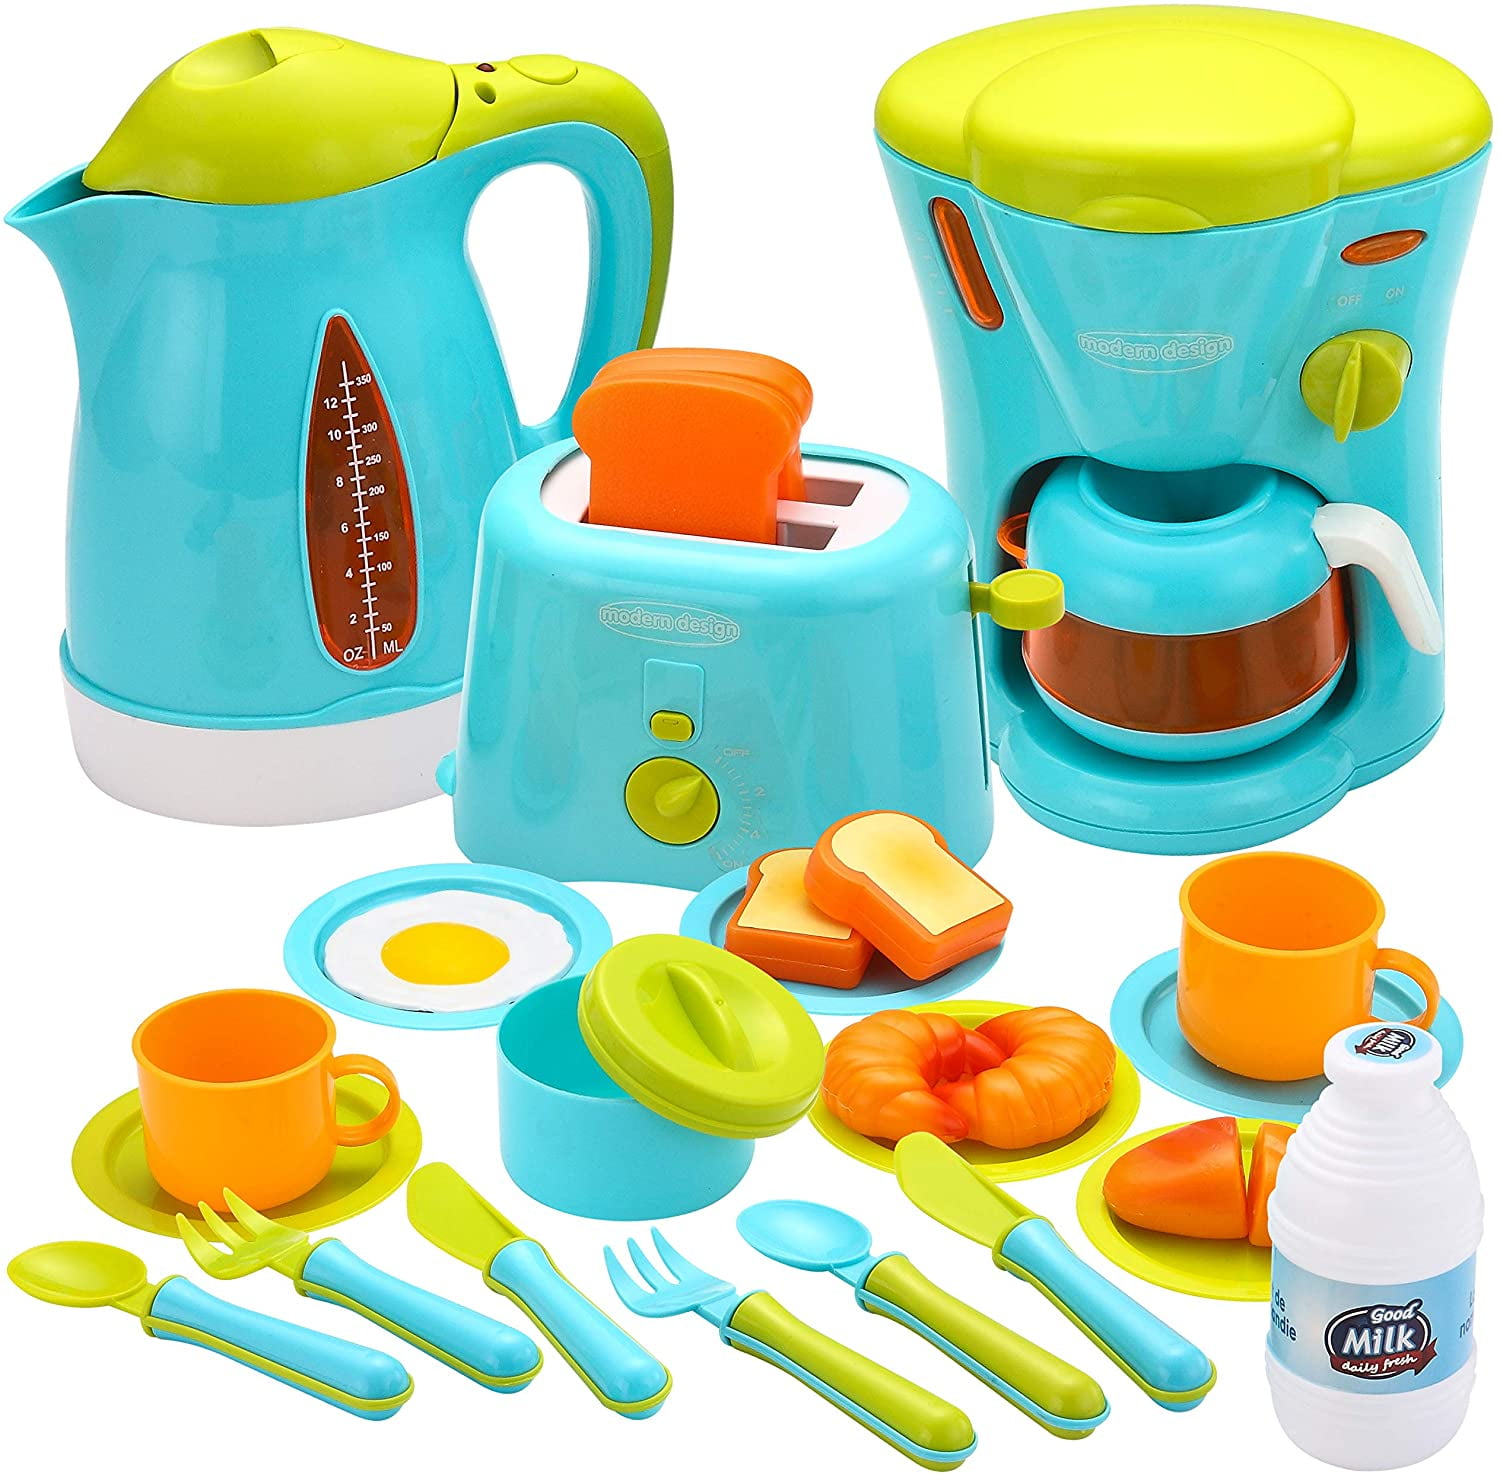 Kids Children Pretend Play Happy Home Toaster and Water Dispenser Set 